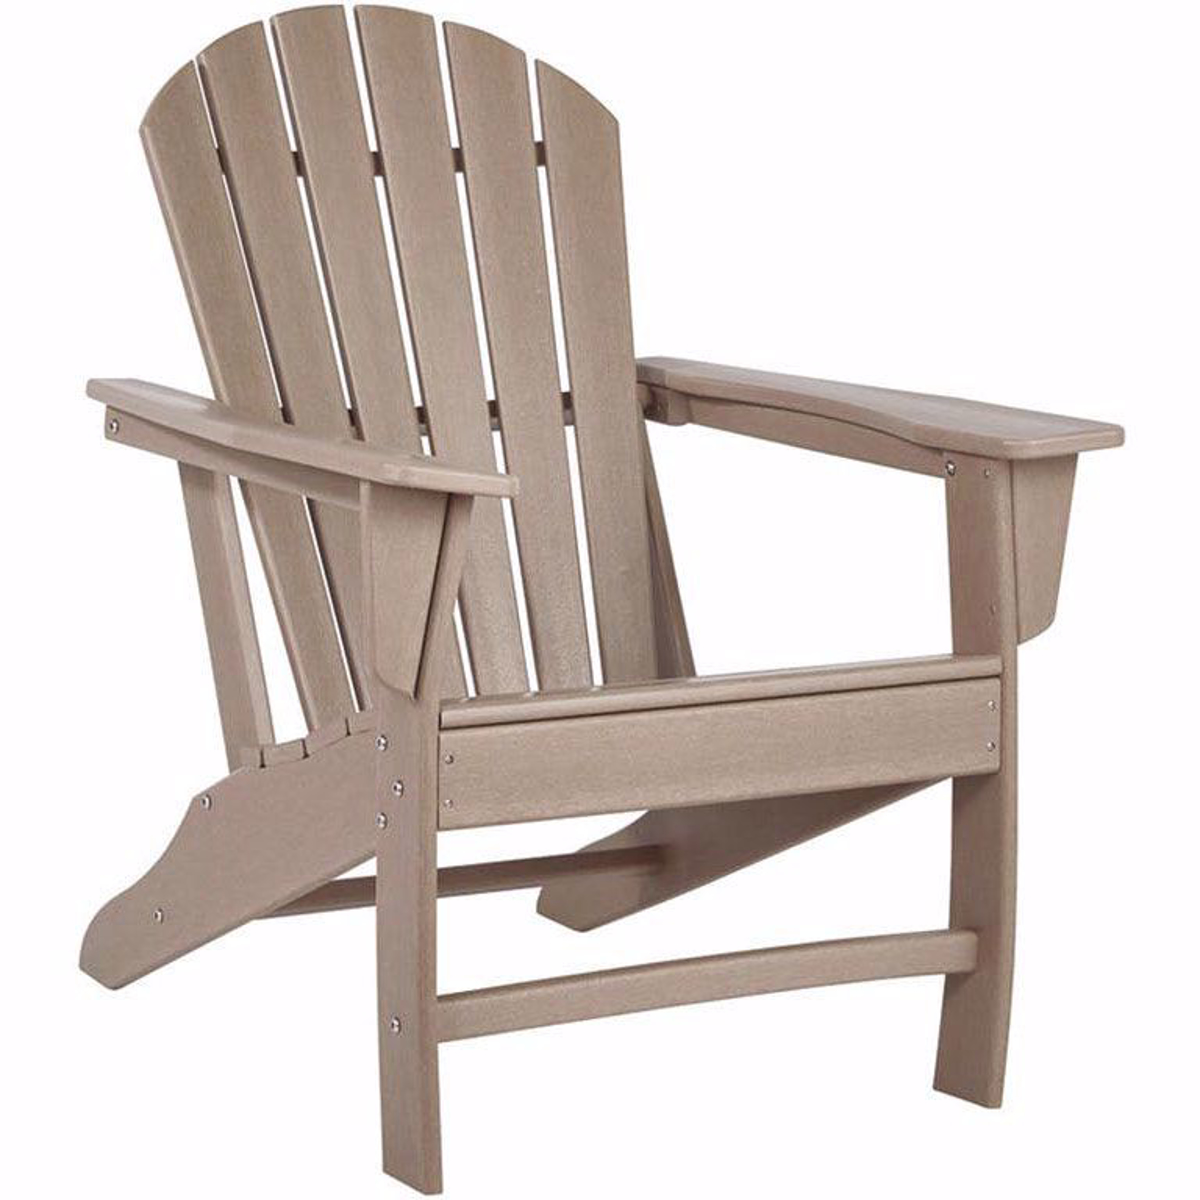 Picture of Driftwood Adirondack Chair